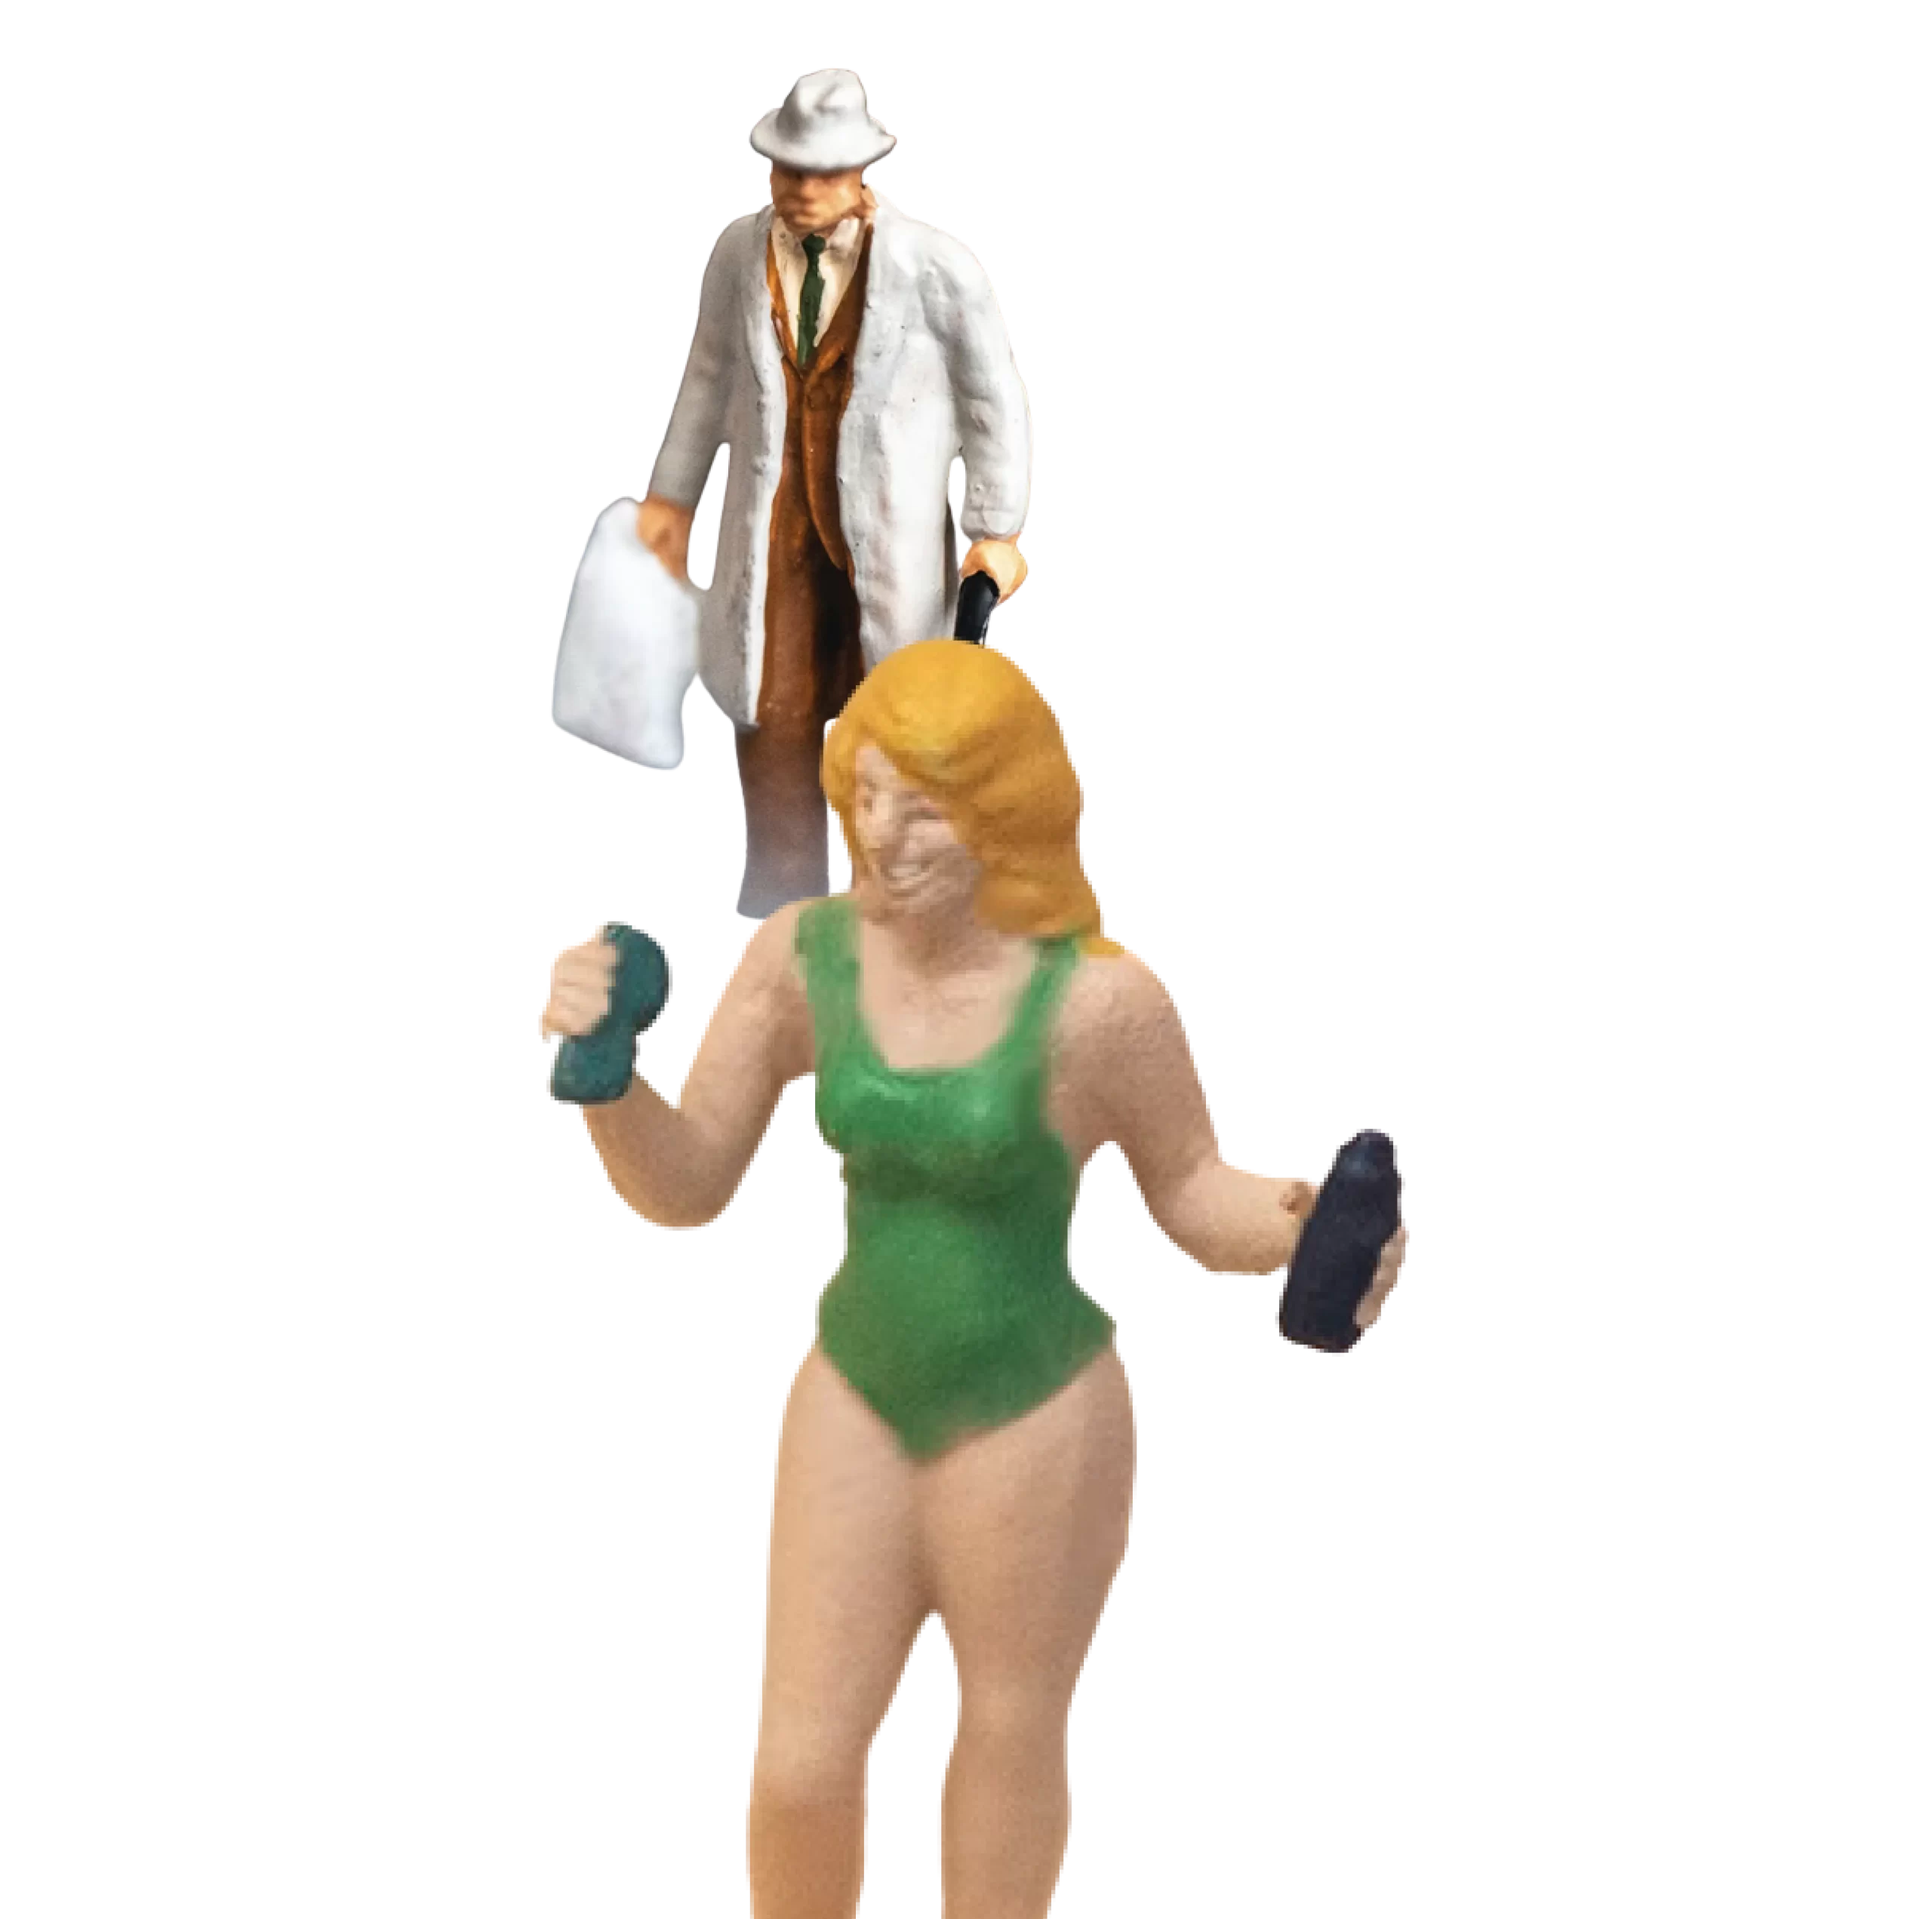 A tiny figurine of a man in a trench coat appears to be looking down at a larger figurine of a woman in a green swimsuit who is in a running pose.